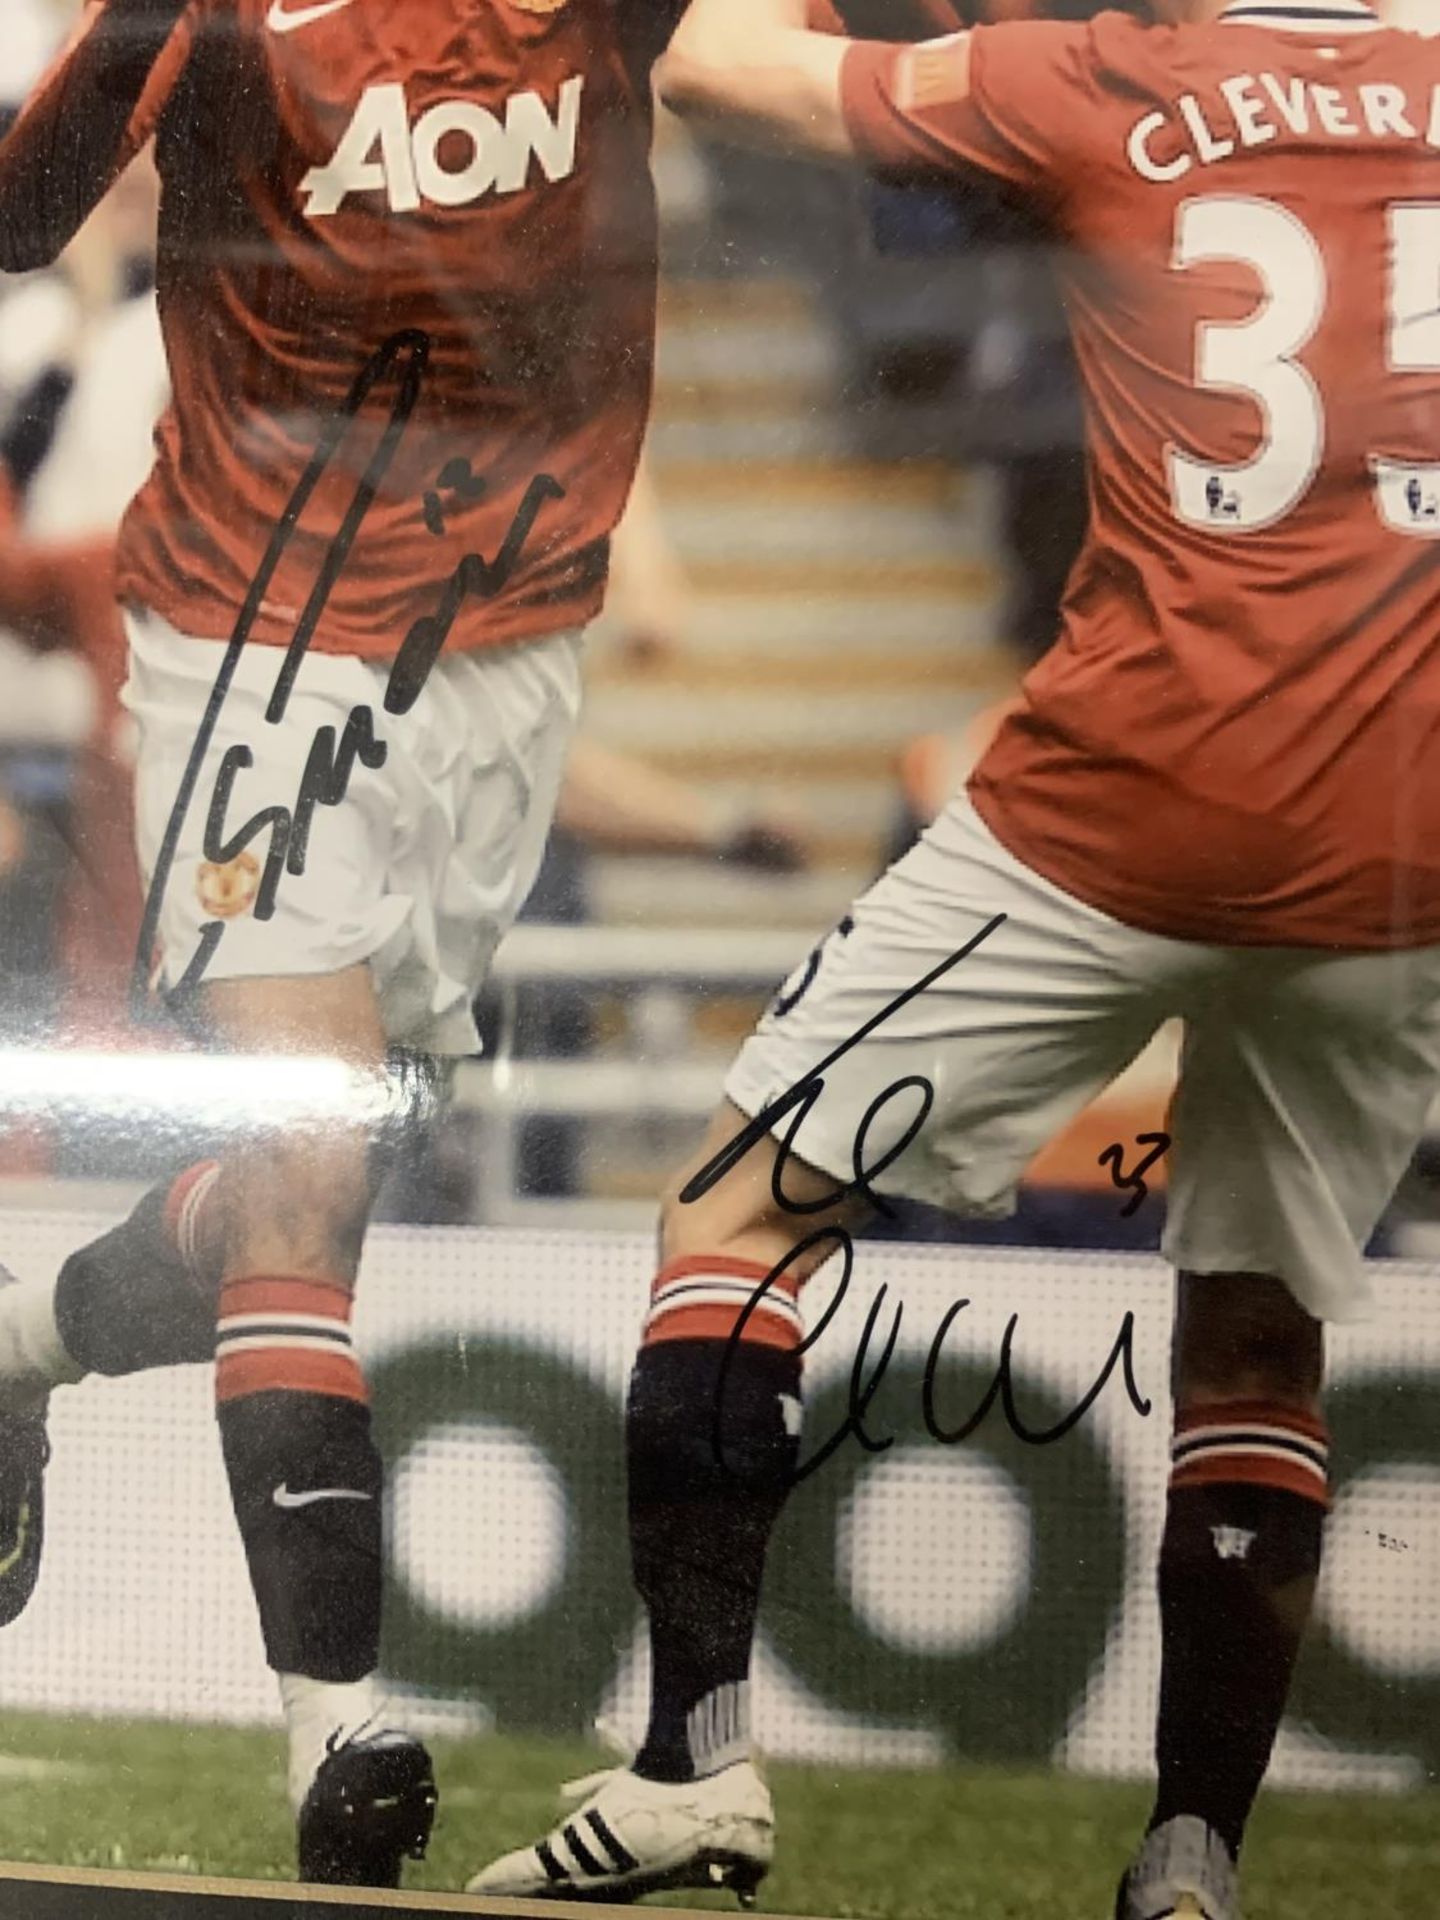 A FRAMED SIGNED PHOTO OF CHRIS SMALLING AND CLEVERLEY - Image 2 of 2